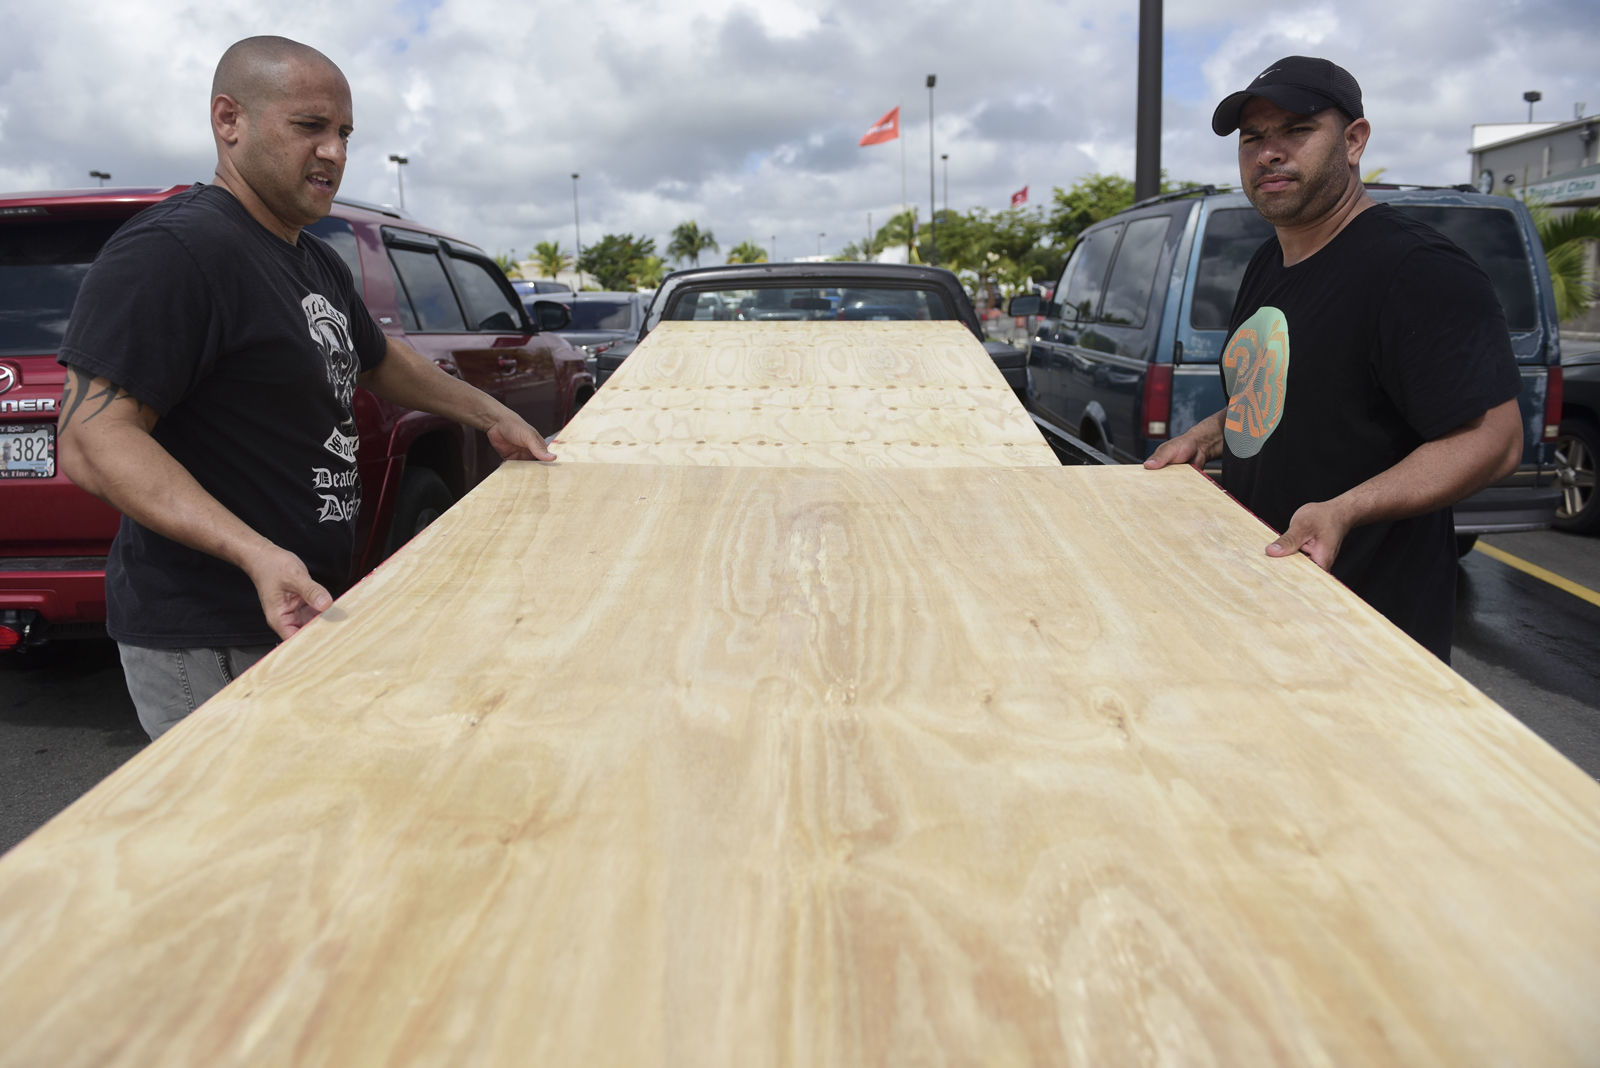 Luis Enrique Garcia, left, and Jose Rivera, load wood panels to be used for boarding up windows in preparation for Hurricane Irma, in Carolina, Puerto Rico, Tuesday, Sept. 5, 2017. Irma grew into a dangerous Category 5 storm, the most powerful seen in the Atlantic in over a decade, and roared toward islands in the northeast Caribbean Tuesday. (AP Photo/Carlos Giusti)